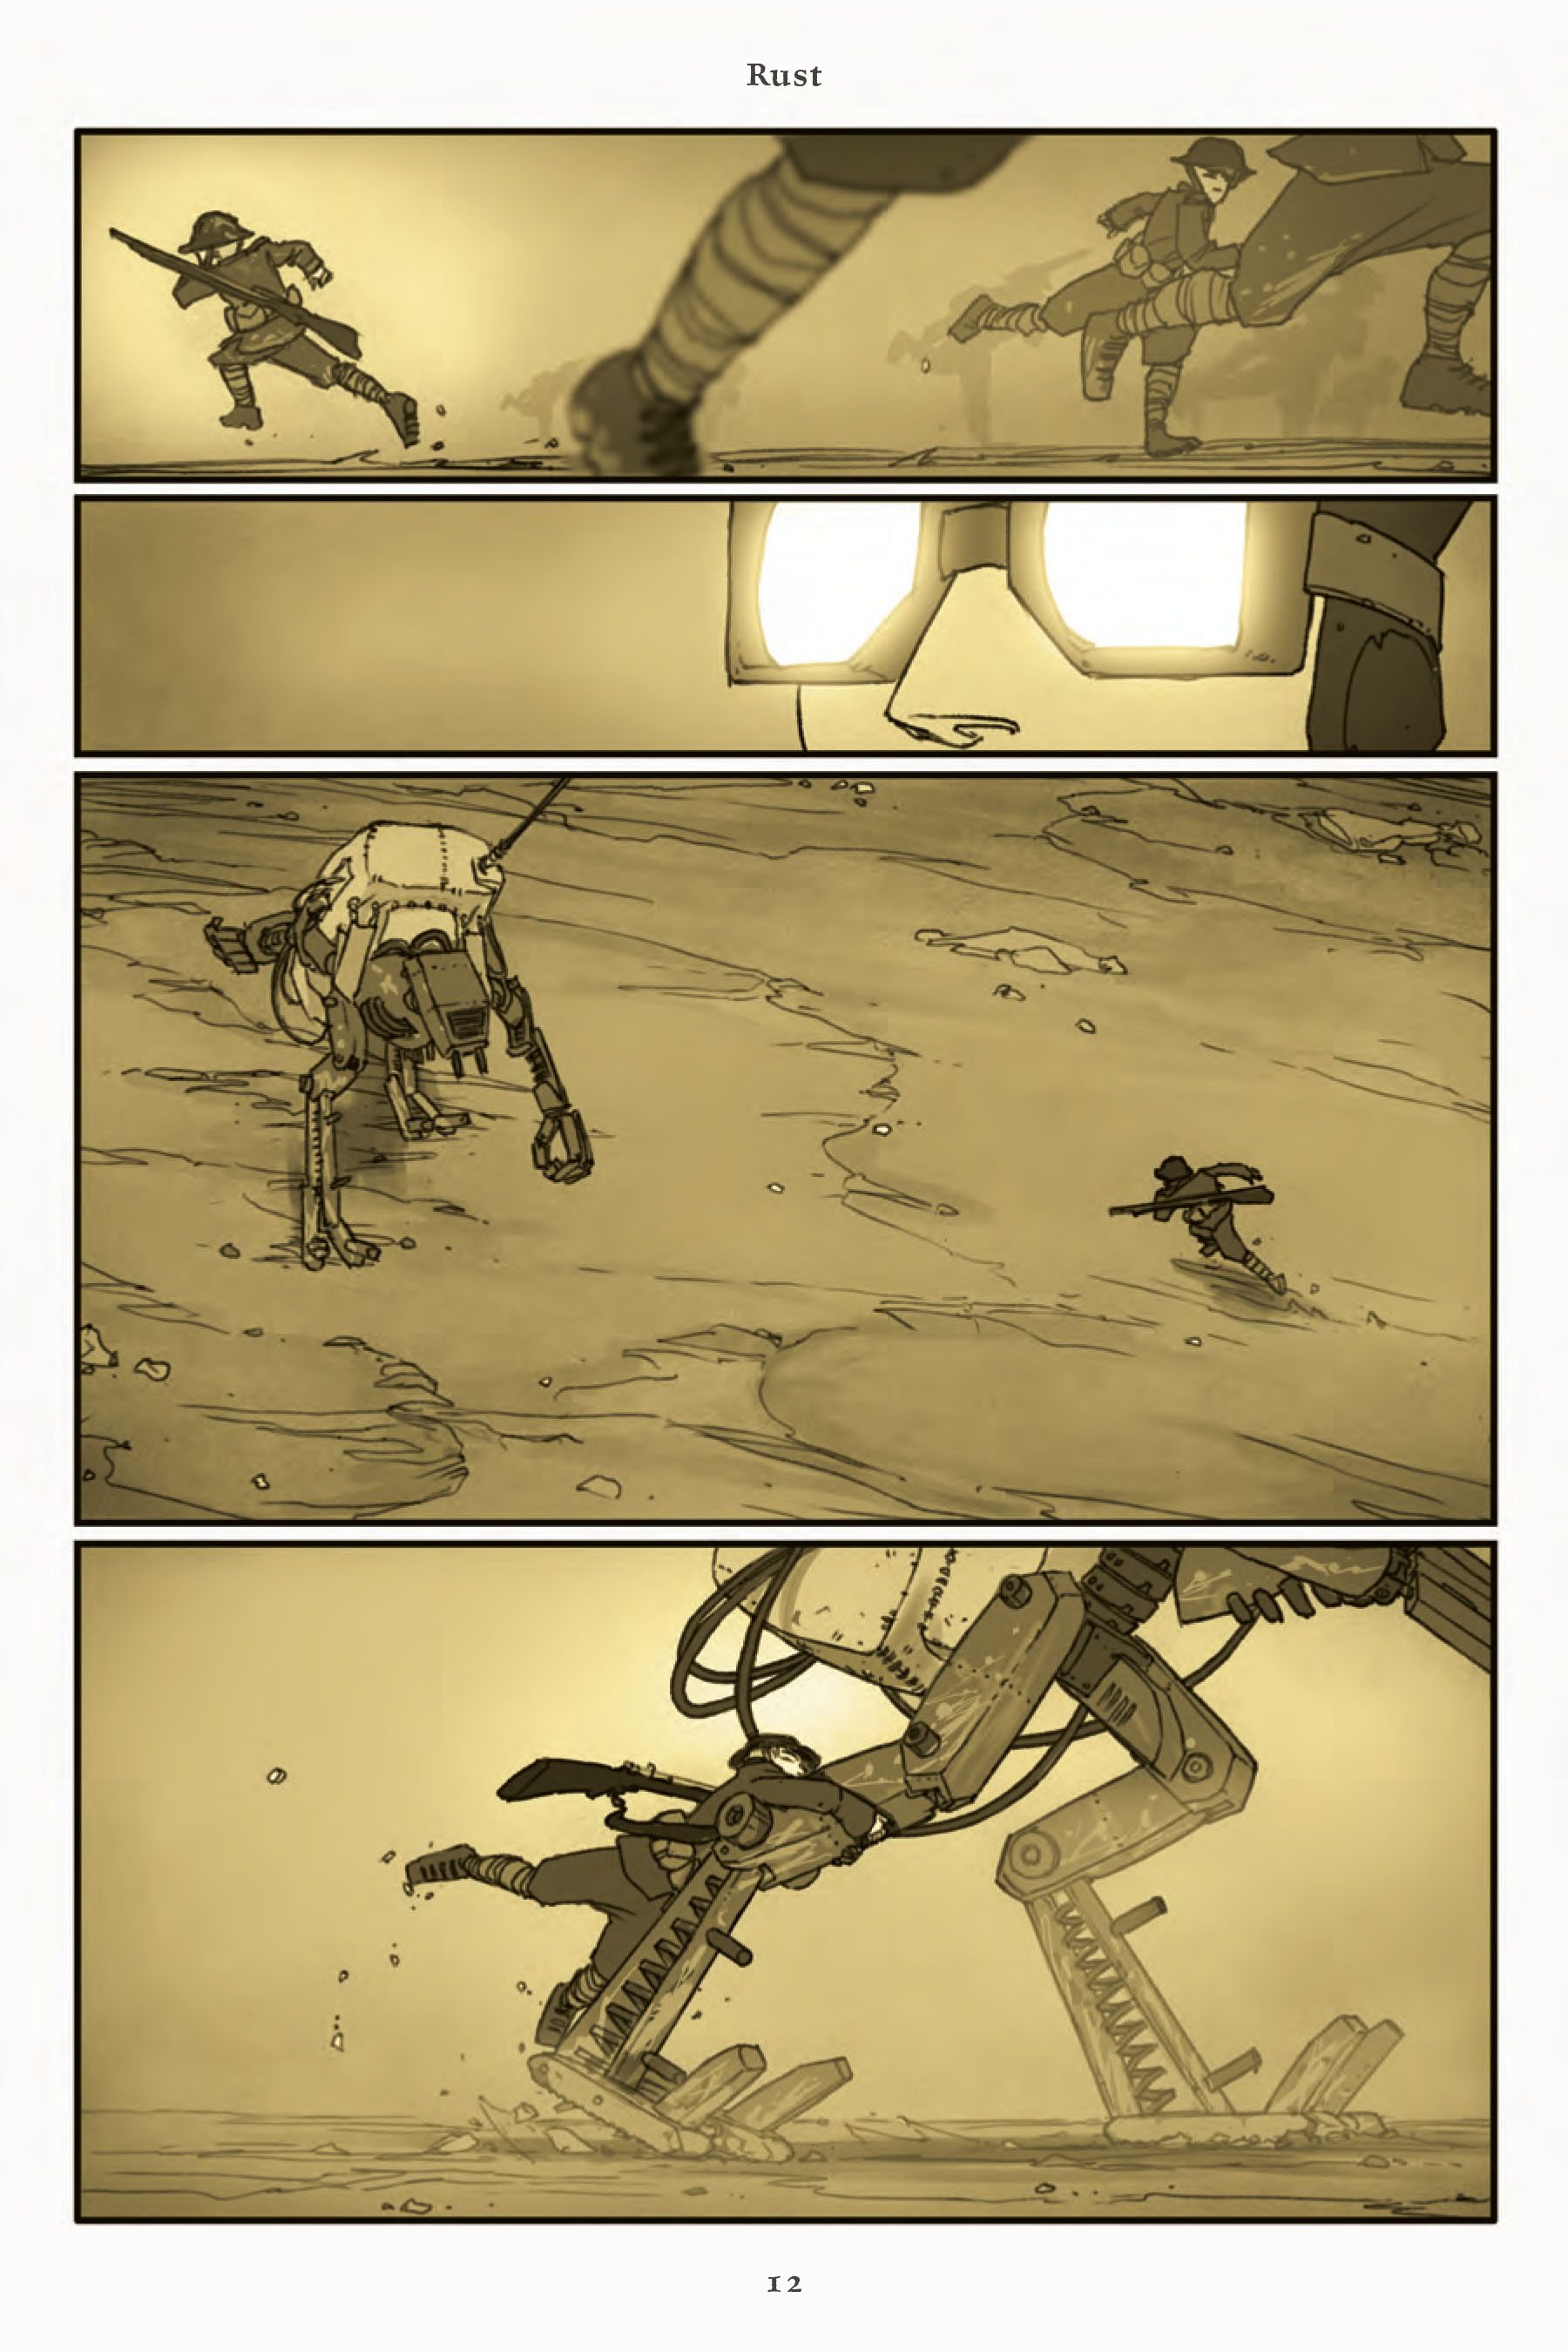 Rust_The_Boy_Soldier_TP_Page_12